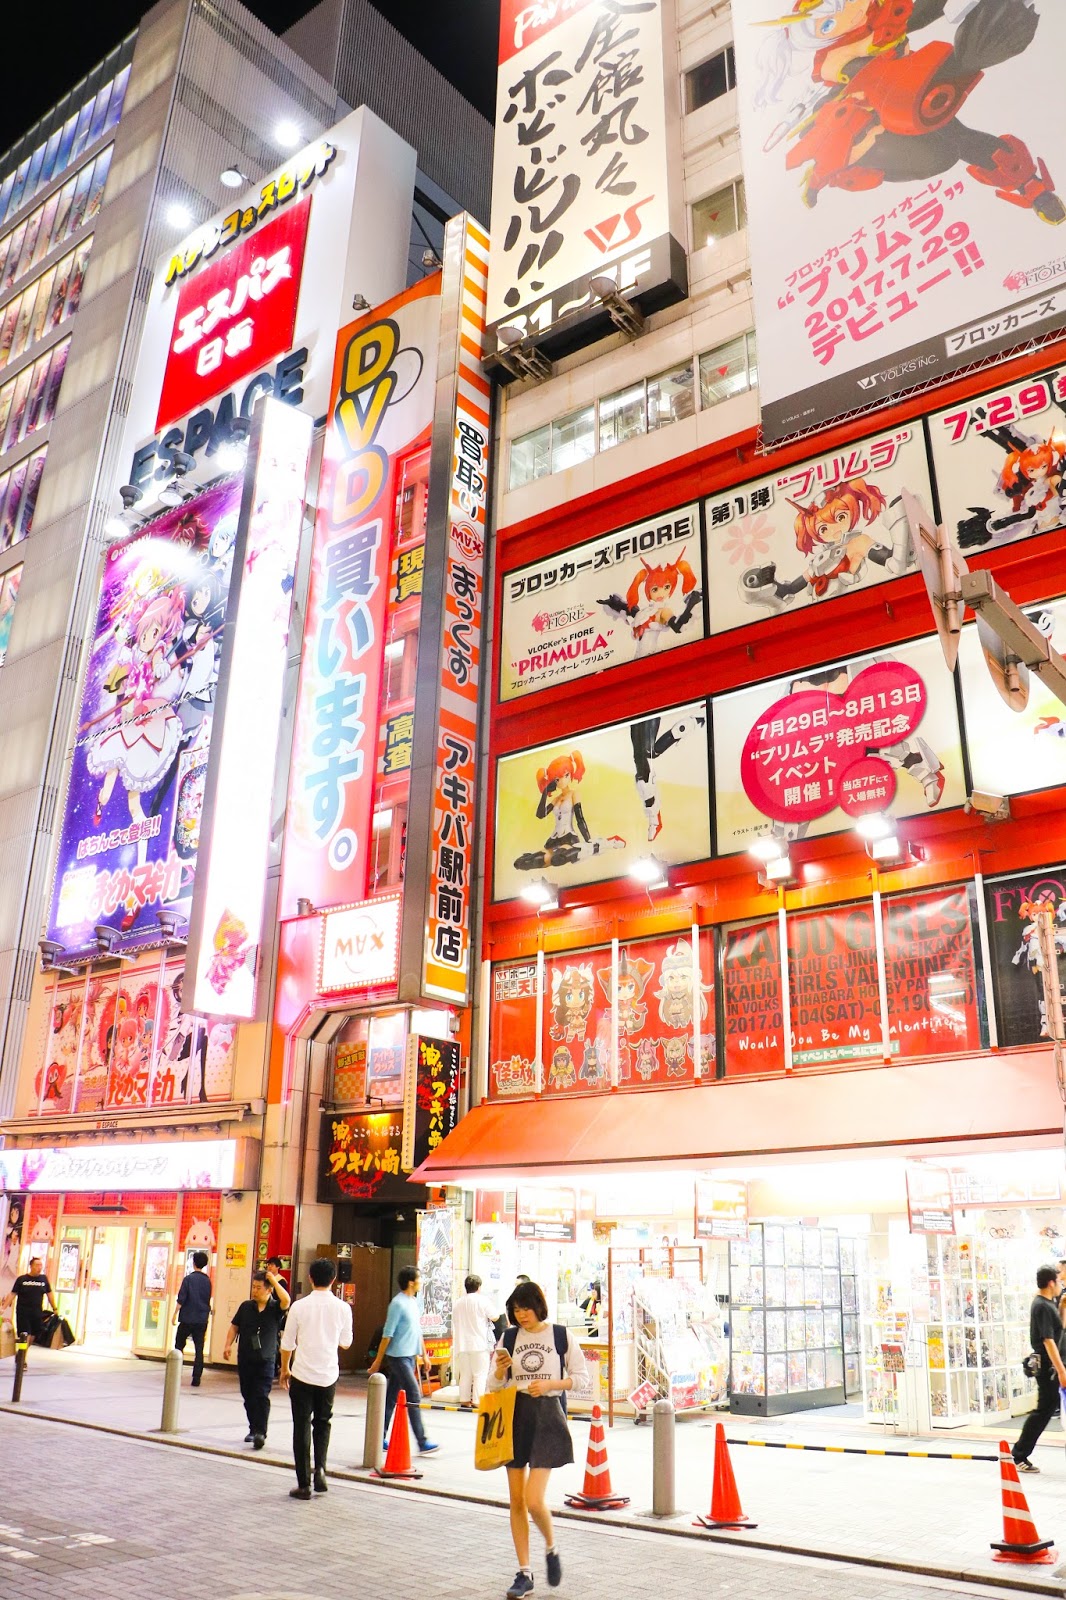 Guide to what to do in Akihabara